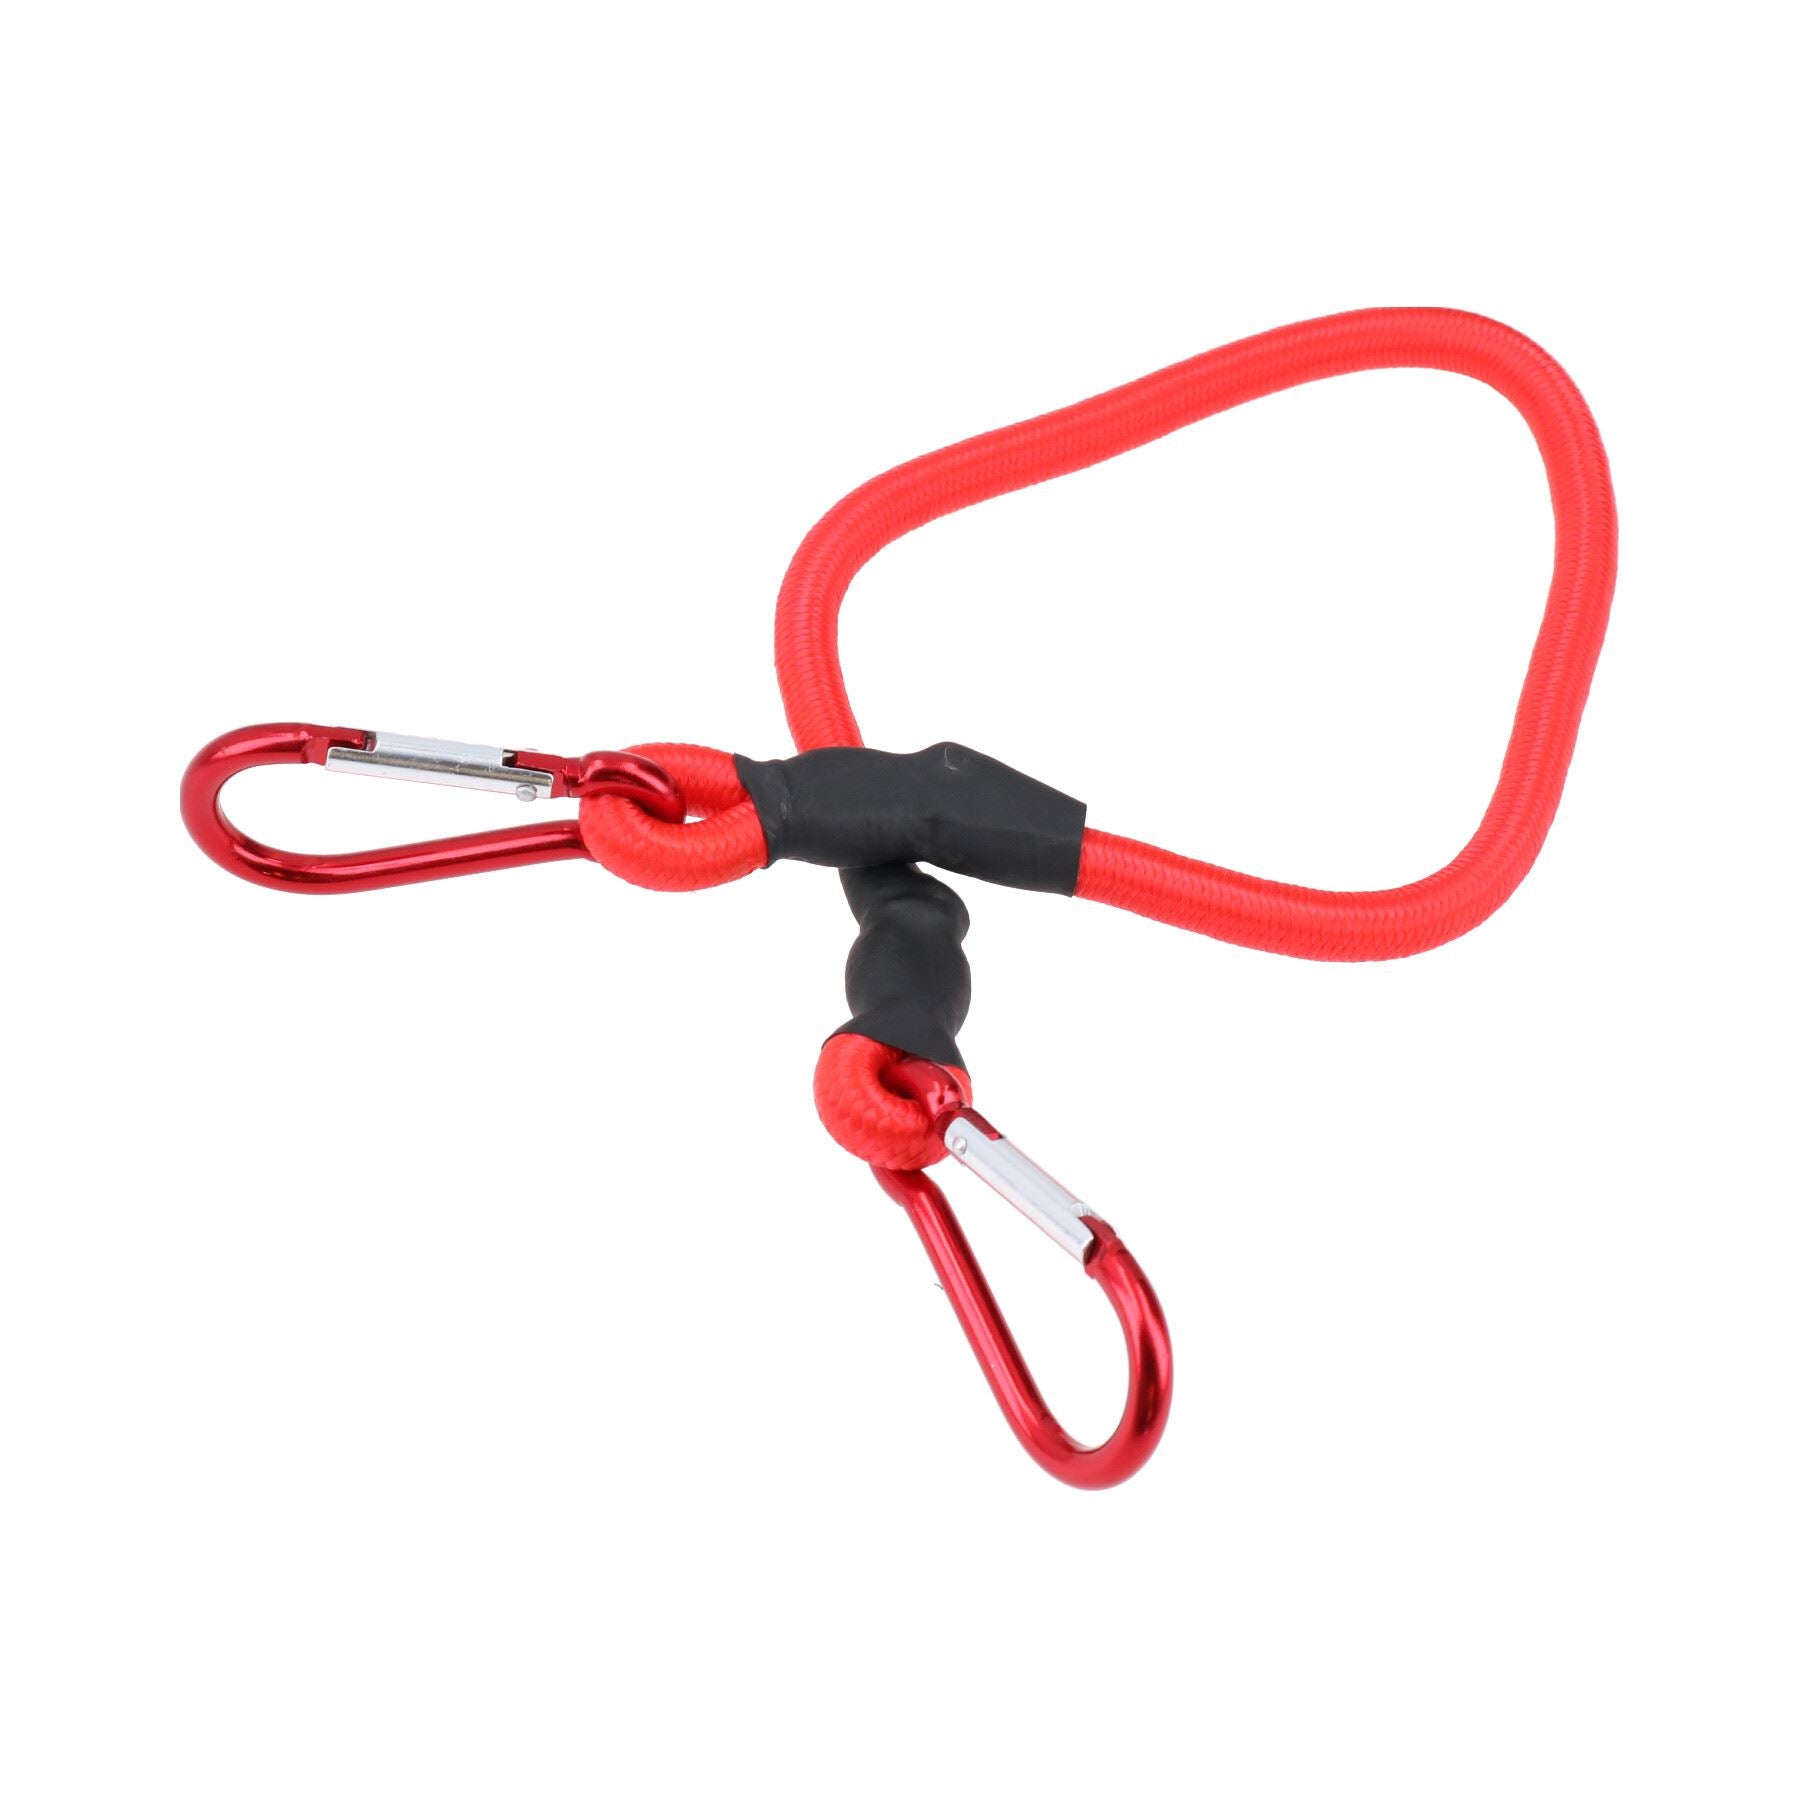 24” 60cm Bungee Rope with Carabiner Clips Cords Elastic Tie Down Fasteners